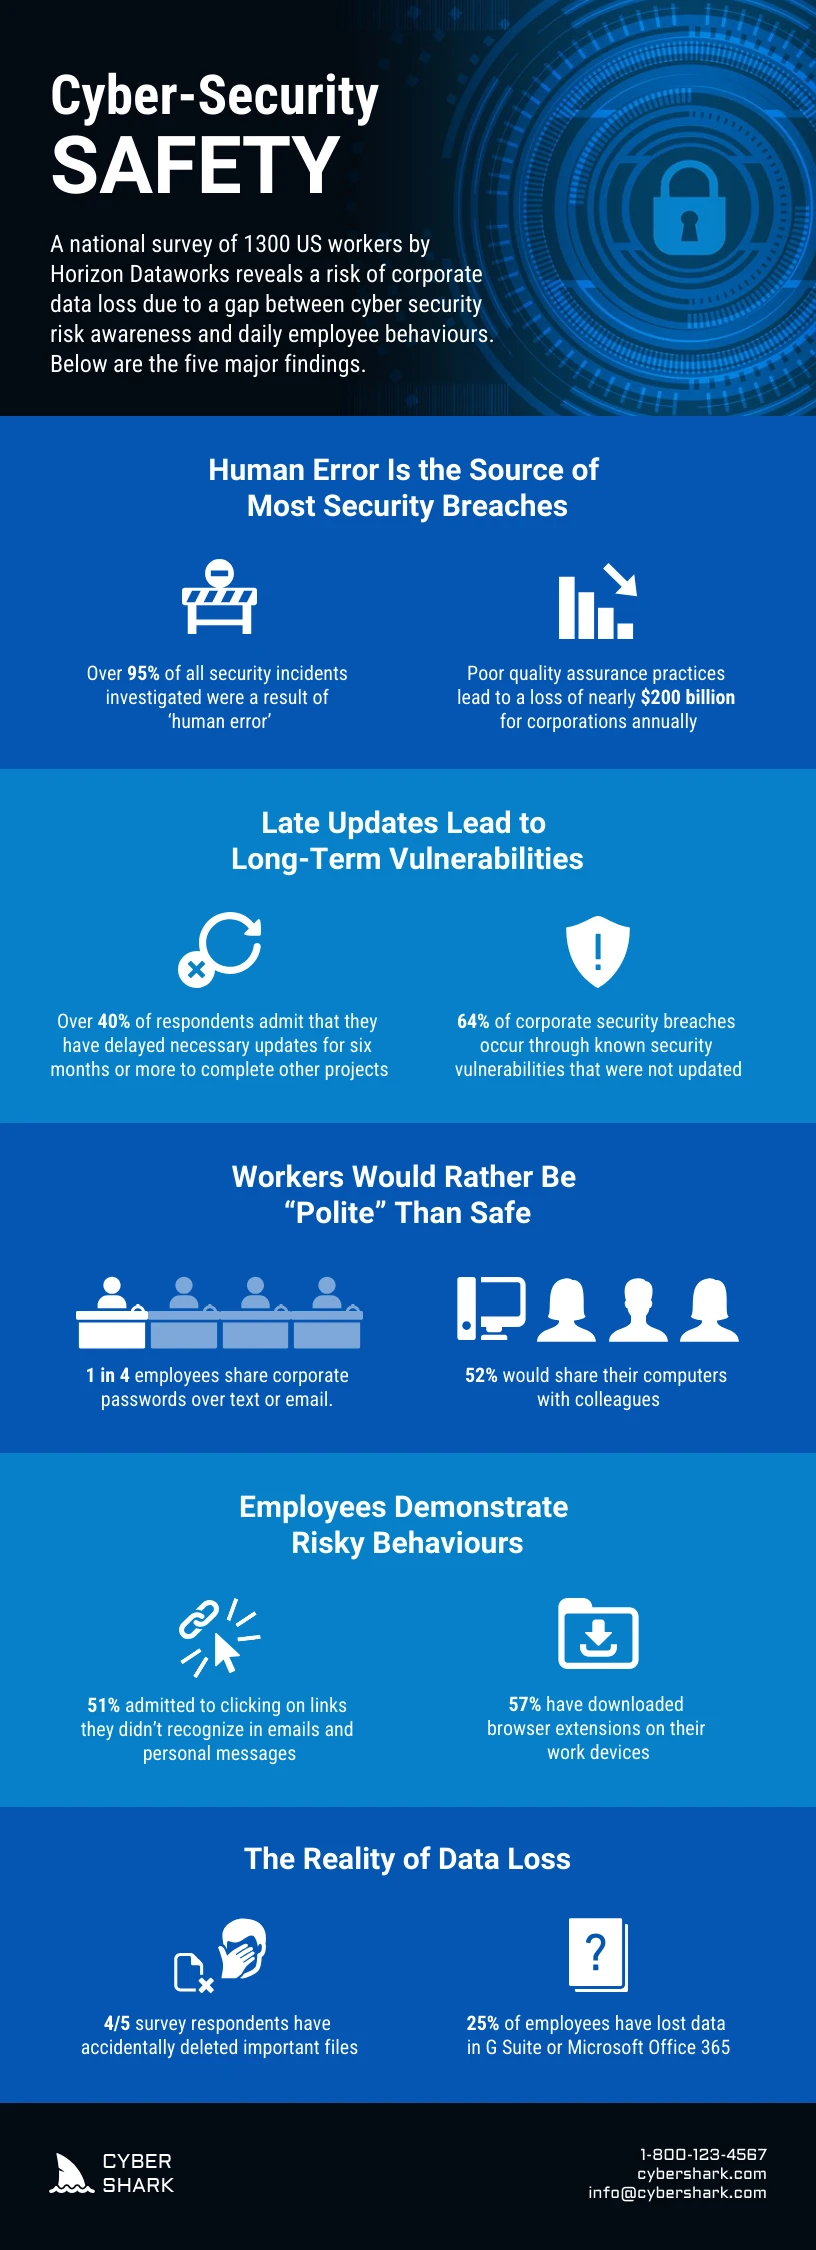 Cyber Security Safety Infographic - Venngage